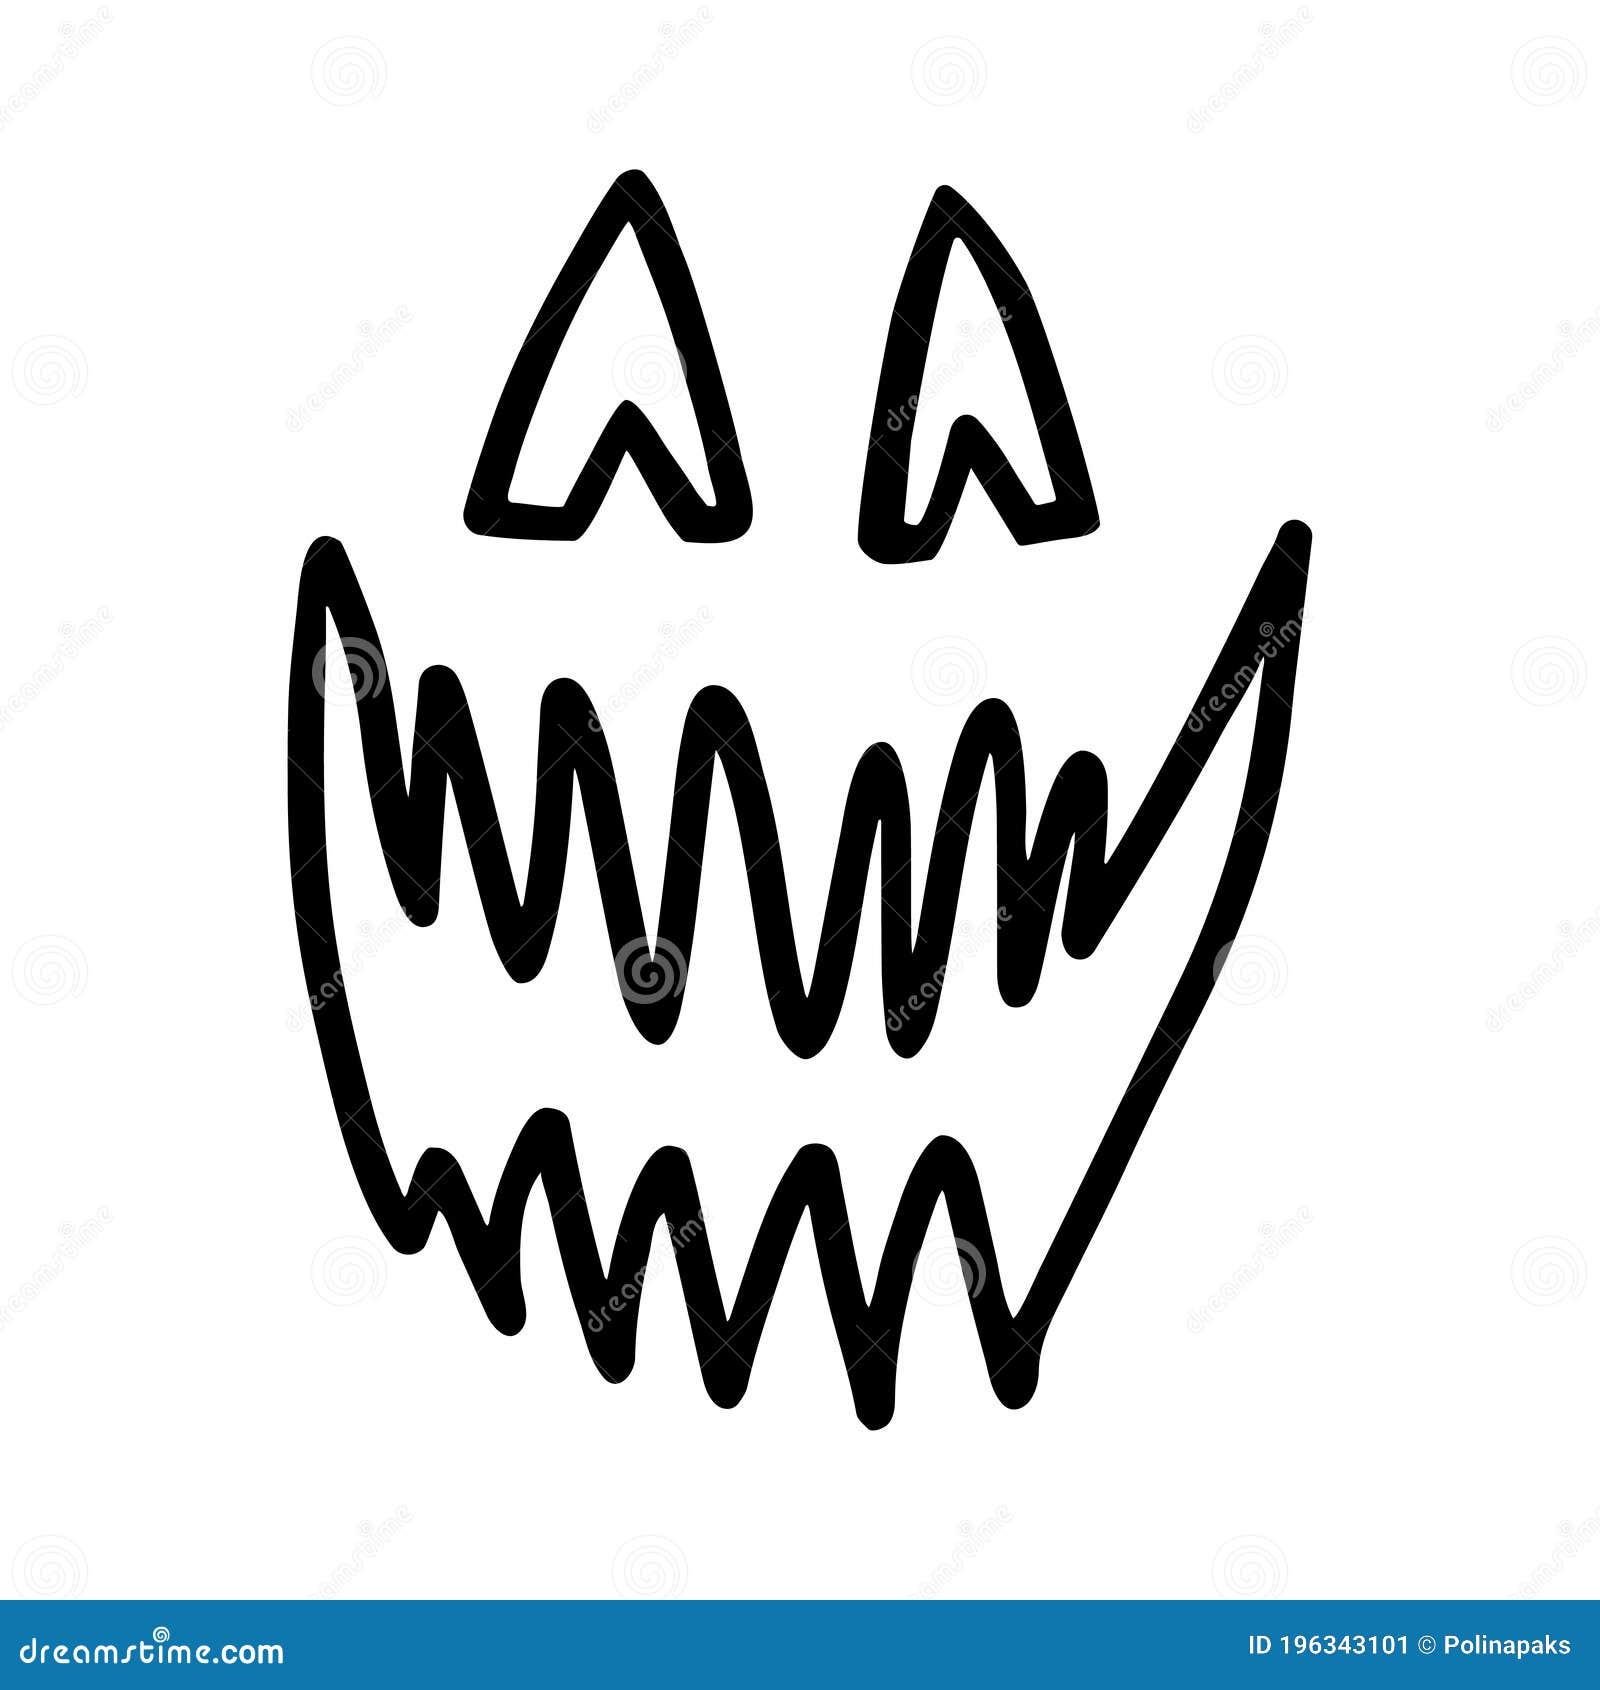 Scary Face Vector Images over 91000